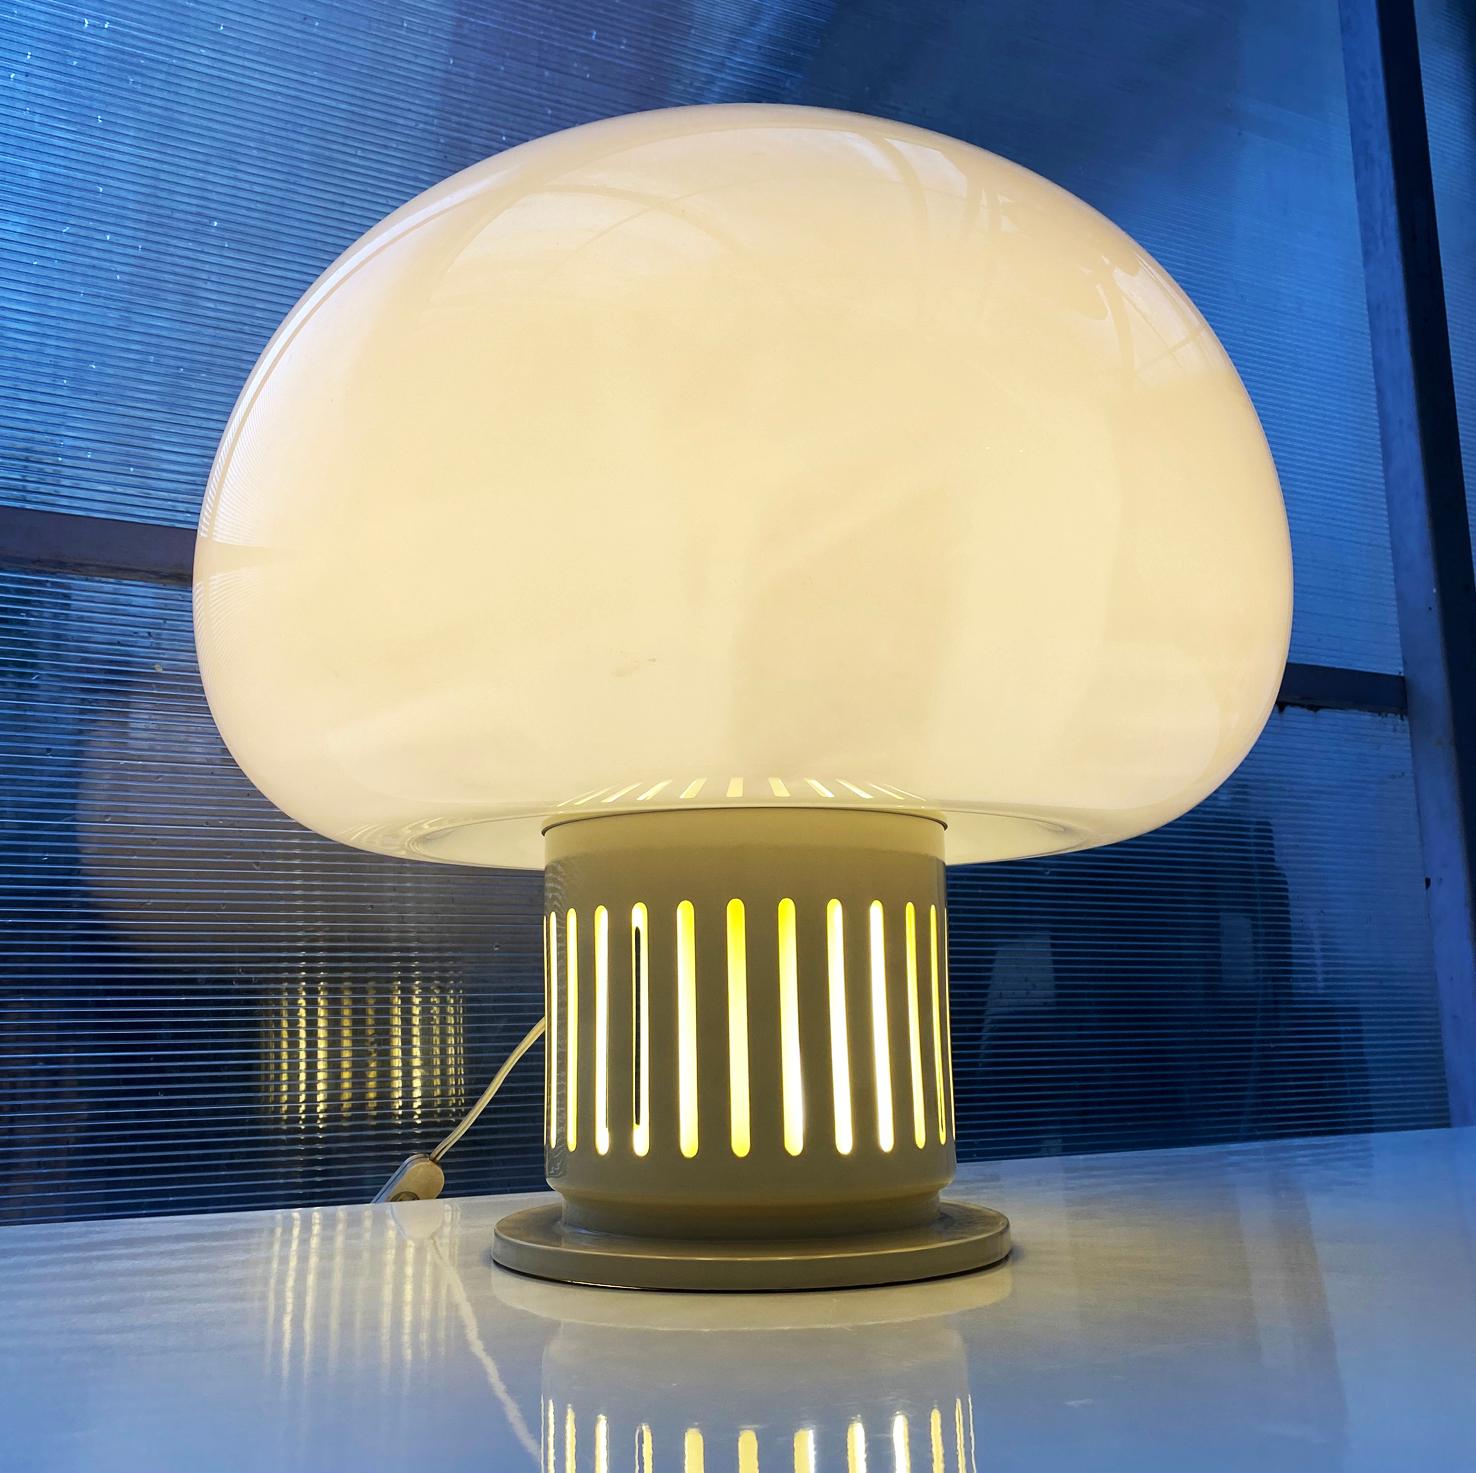 Paola lamp by Studio Tetrarch for Lumenform 1968

Exceptional lighting: Paola lamp by Studio Tetrarch 1968
Publisher: Lumenform
Dimensions: Height: 49 cm, diameter: 50 cm.
Materials: Aluminum, Opaline Glass
in a perfect condition